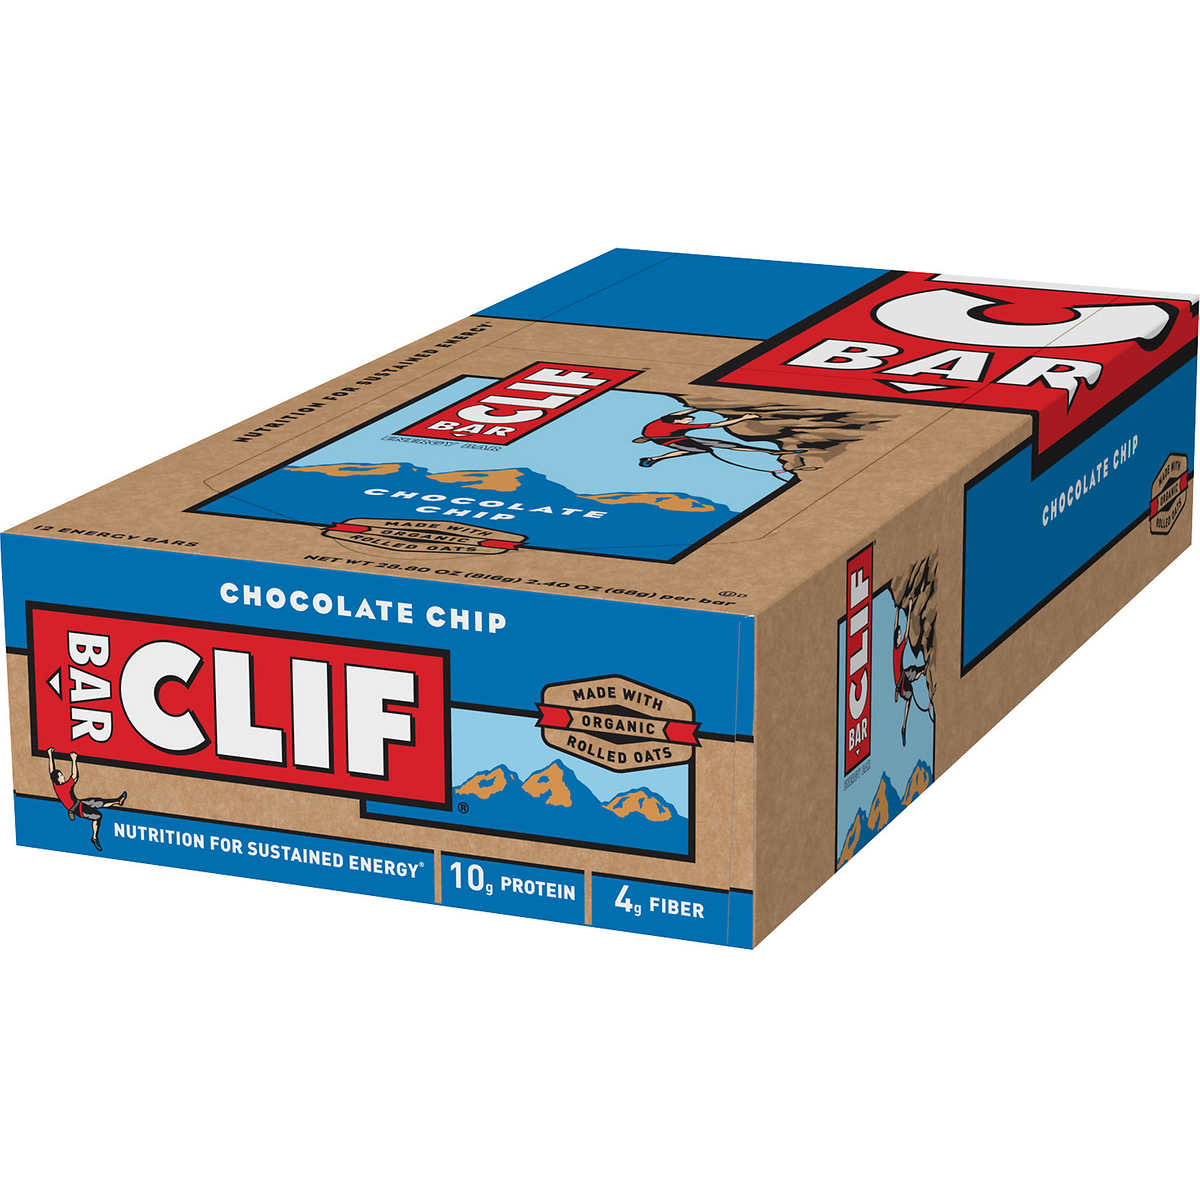 Clif Bar Chocolate Chip, 2.4 oz, 12-count